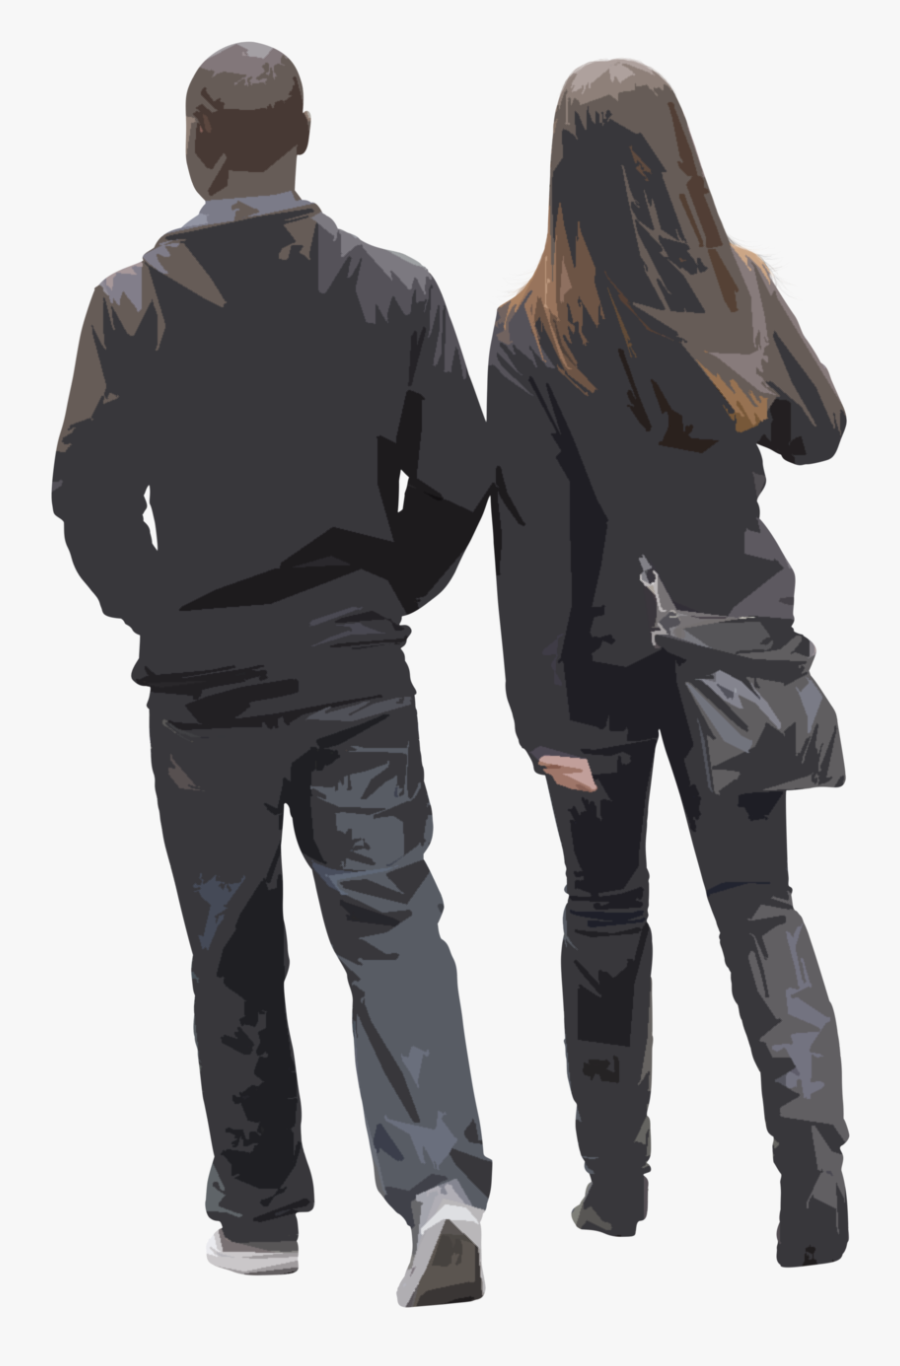 Nonscandinavia - Cut Out People Walking Png, Transparent Clipart